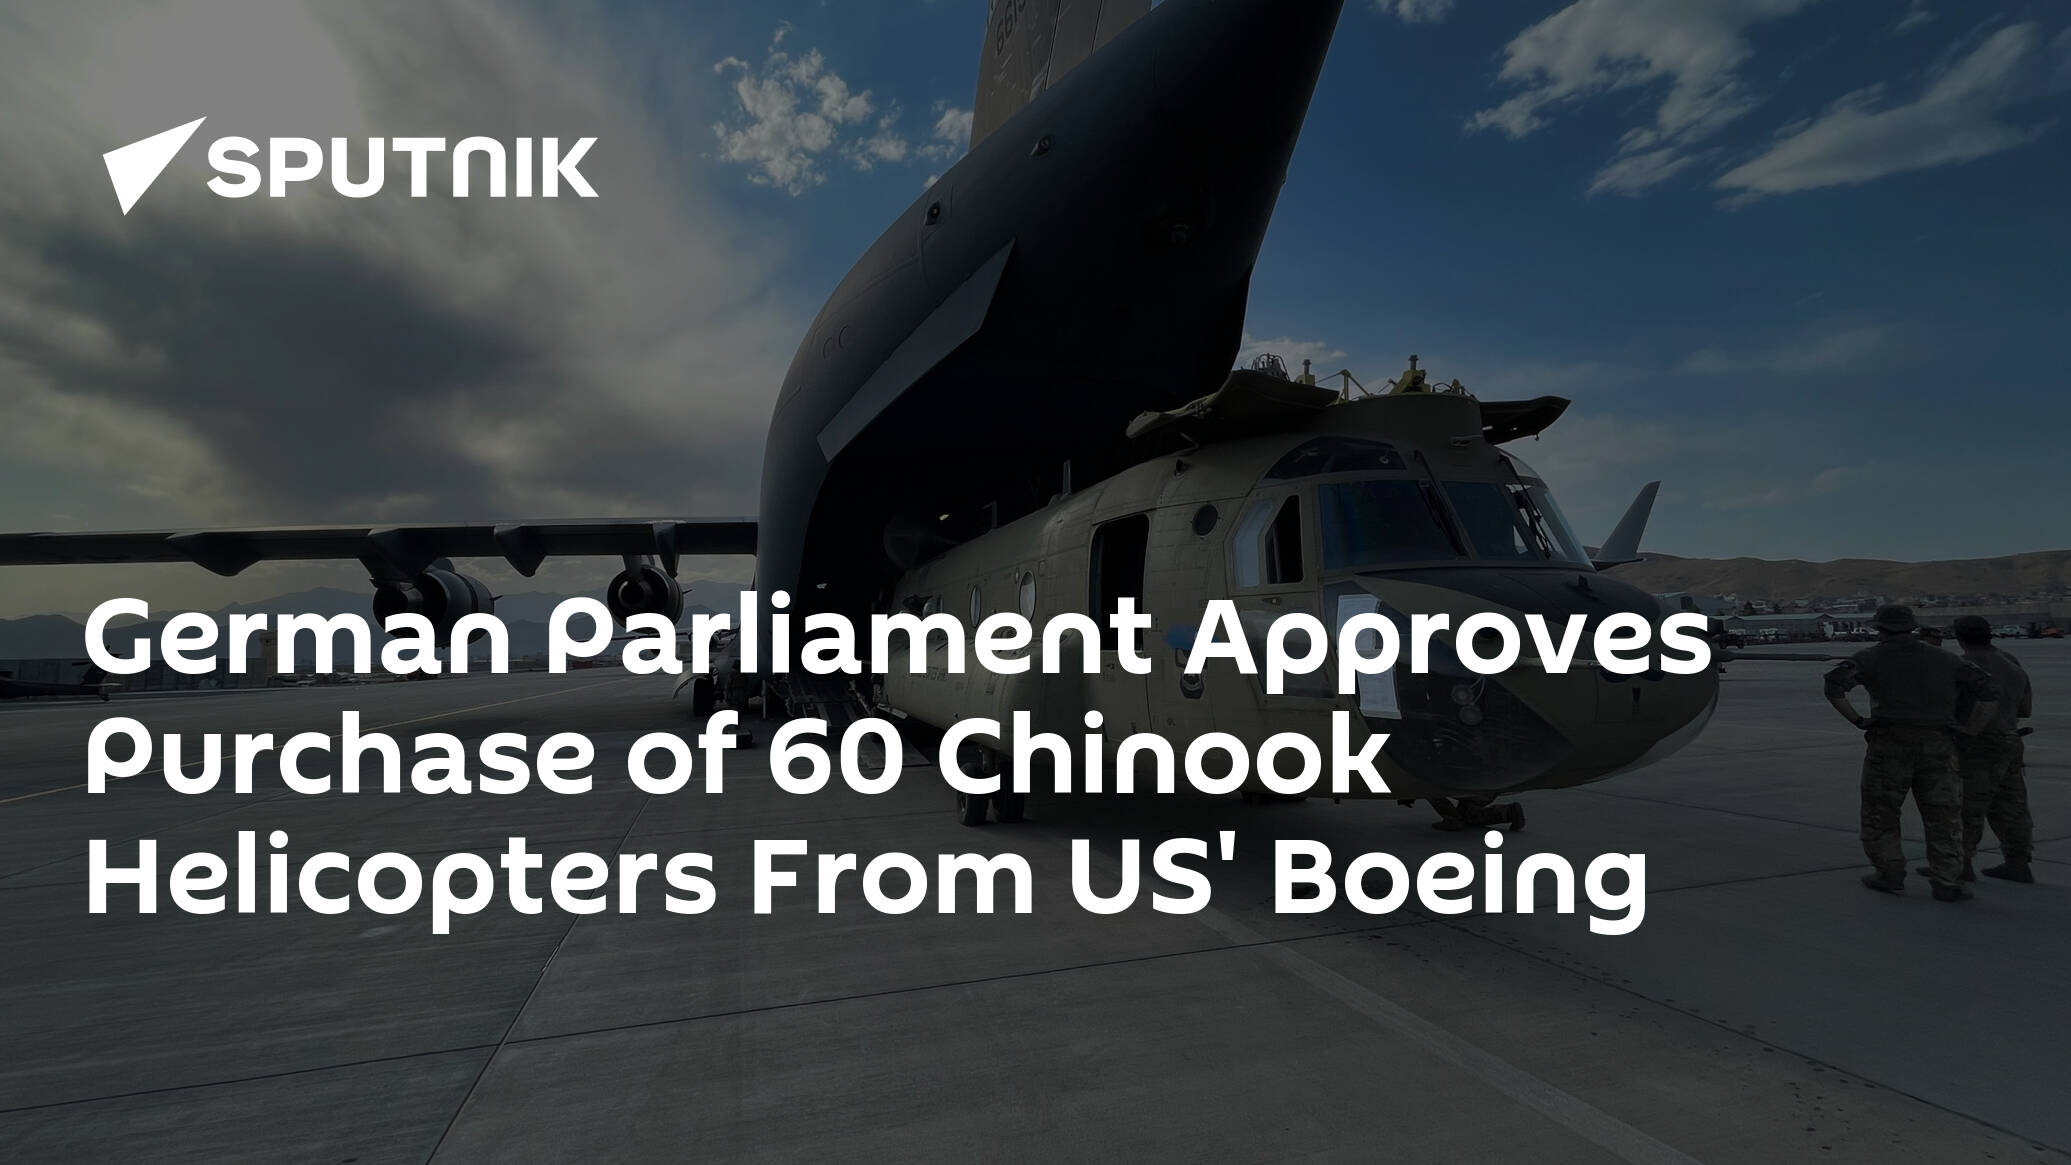 German Parliament Approves Purchase of 60 Chinook Helicopters From US' Boeing